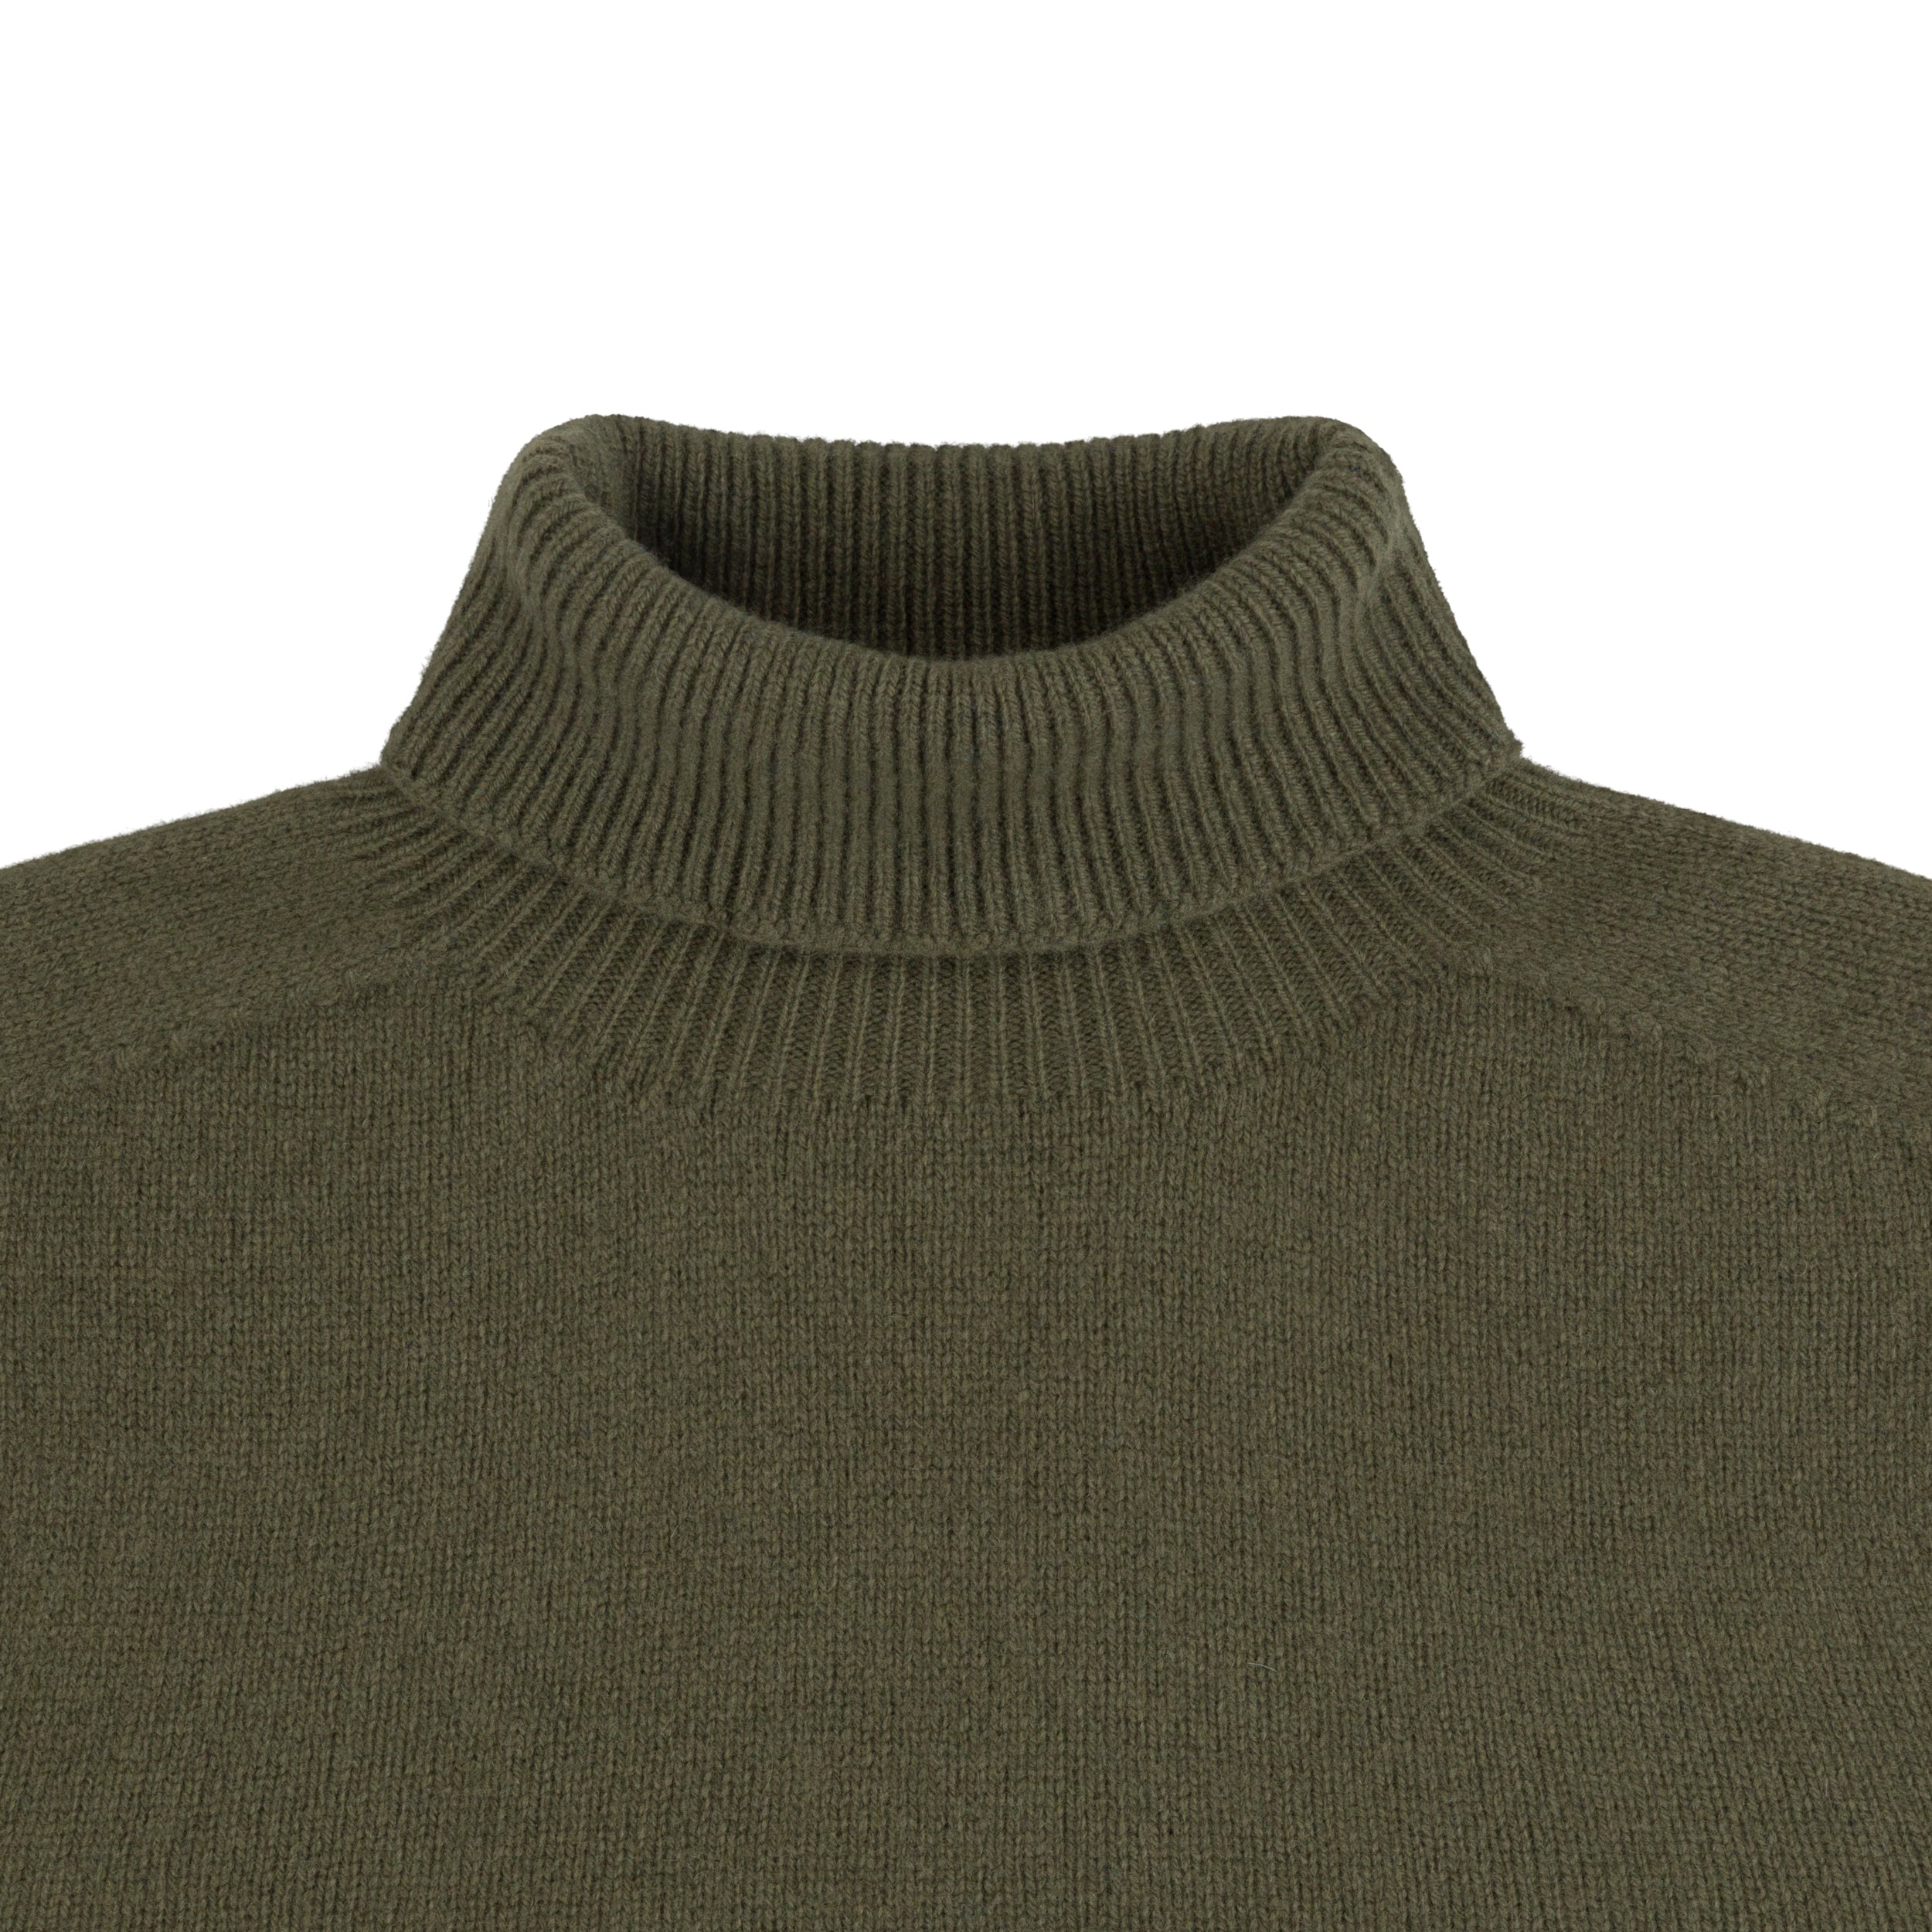 Carrier Company Hand Cashmere and Merino Supersoft Roll Neck Jumper in Olive